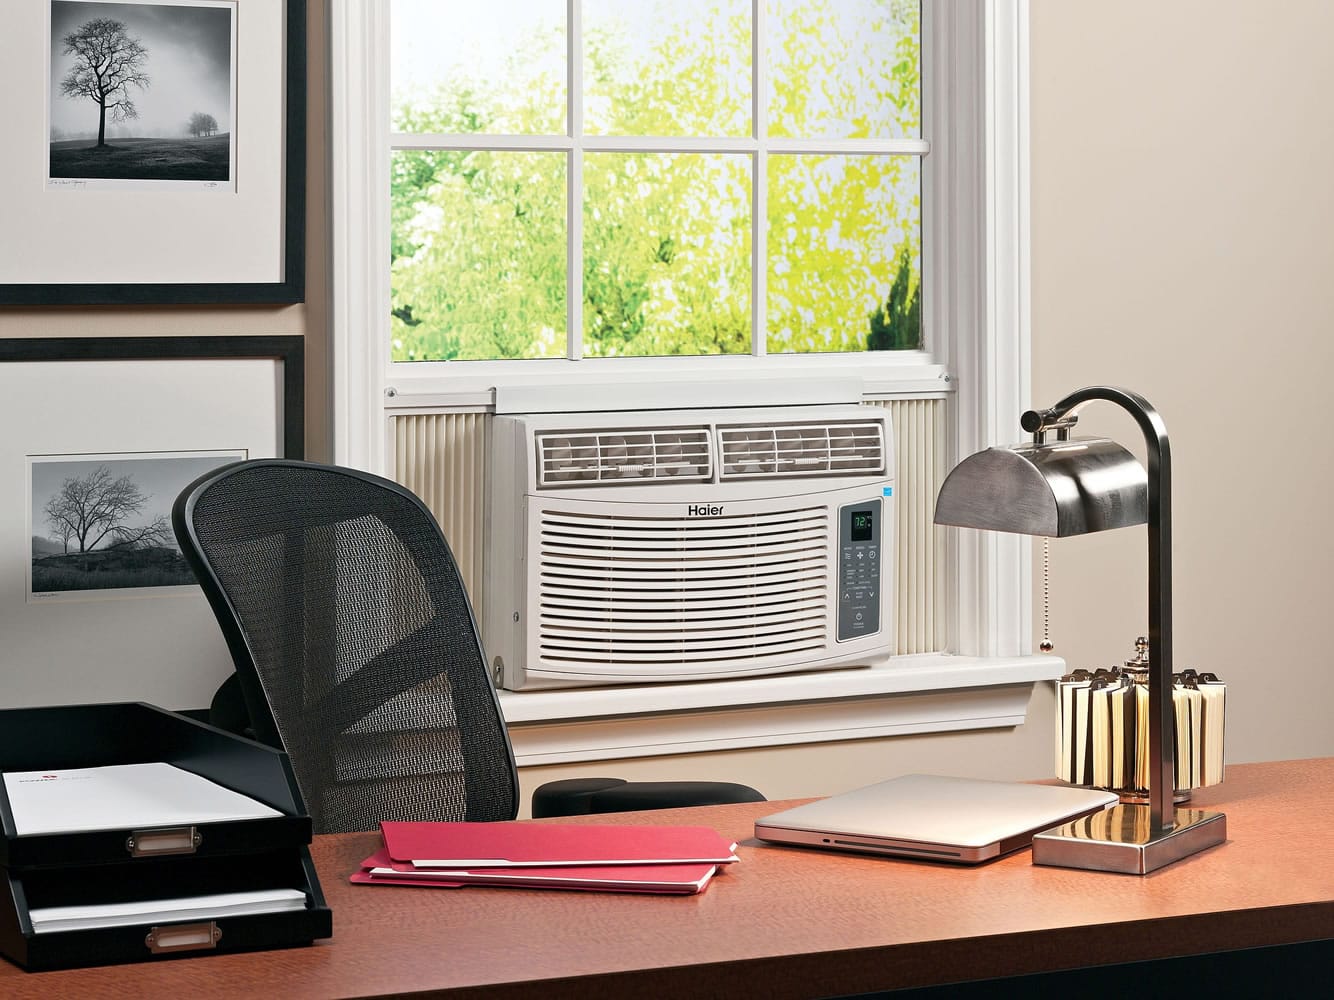 Haier America
An Energy Star-qualified room air conditioner offers comfort in an office. A little savvy about when to open windows and when to keep them covered does much to cool a home, as does putting thought into what appliances to use and when, the experts say.